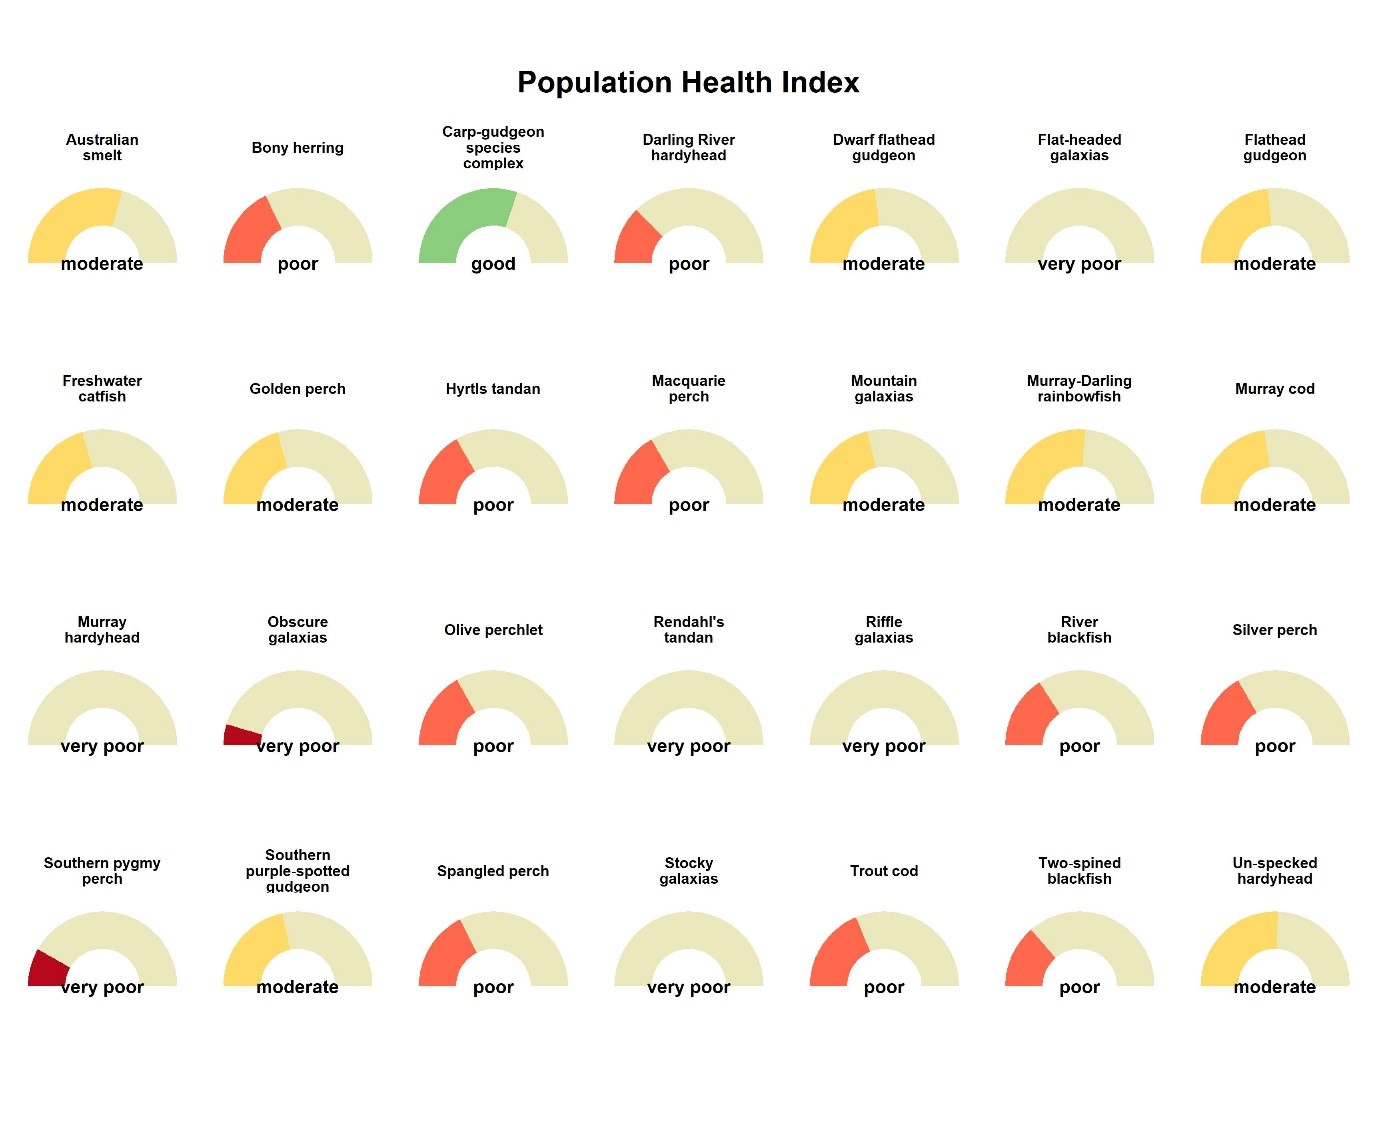 Image depicting population health index for 28 native fish species. Each image is a half pie chart. 10 show as 'poor', 7 as 'very poor', 10 as 'moderate', and 1 as 'good'.